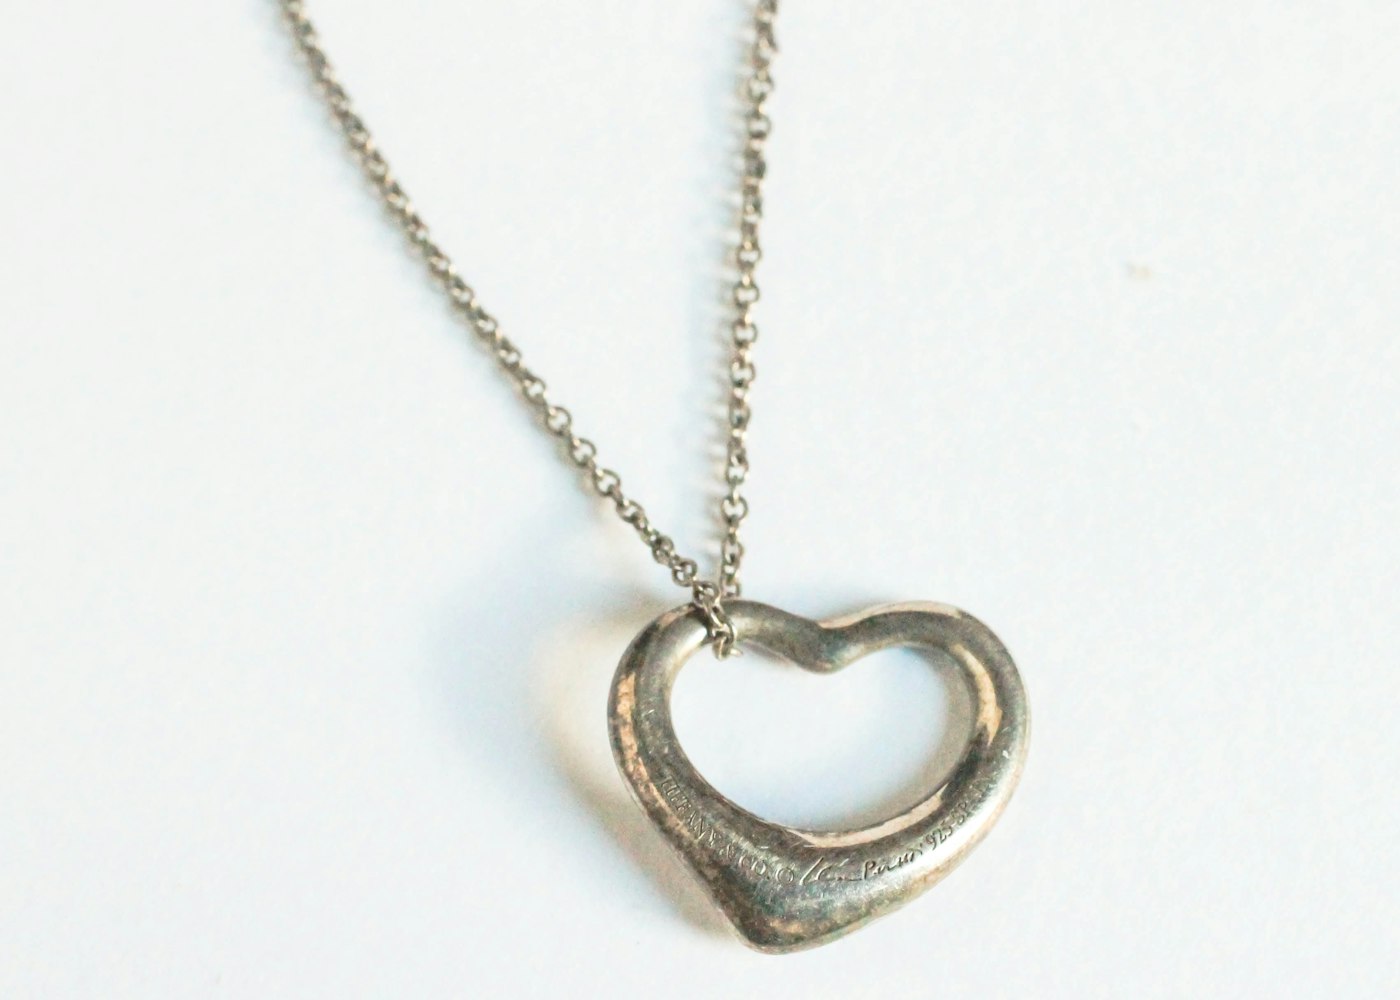 Tiffany & Co. Sterling Silver Heart Charm Necklace | EBTH